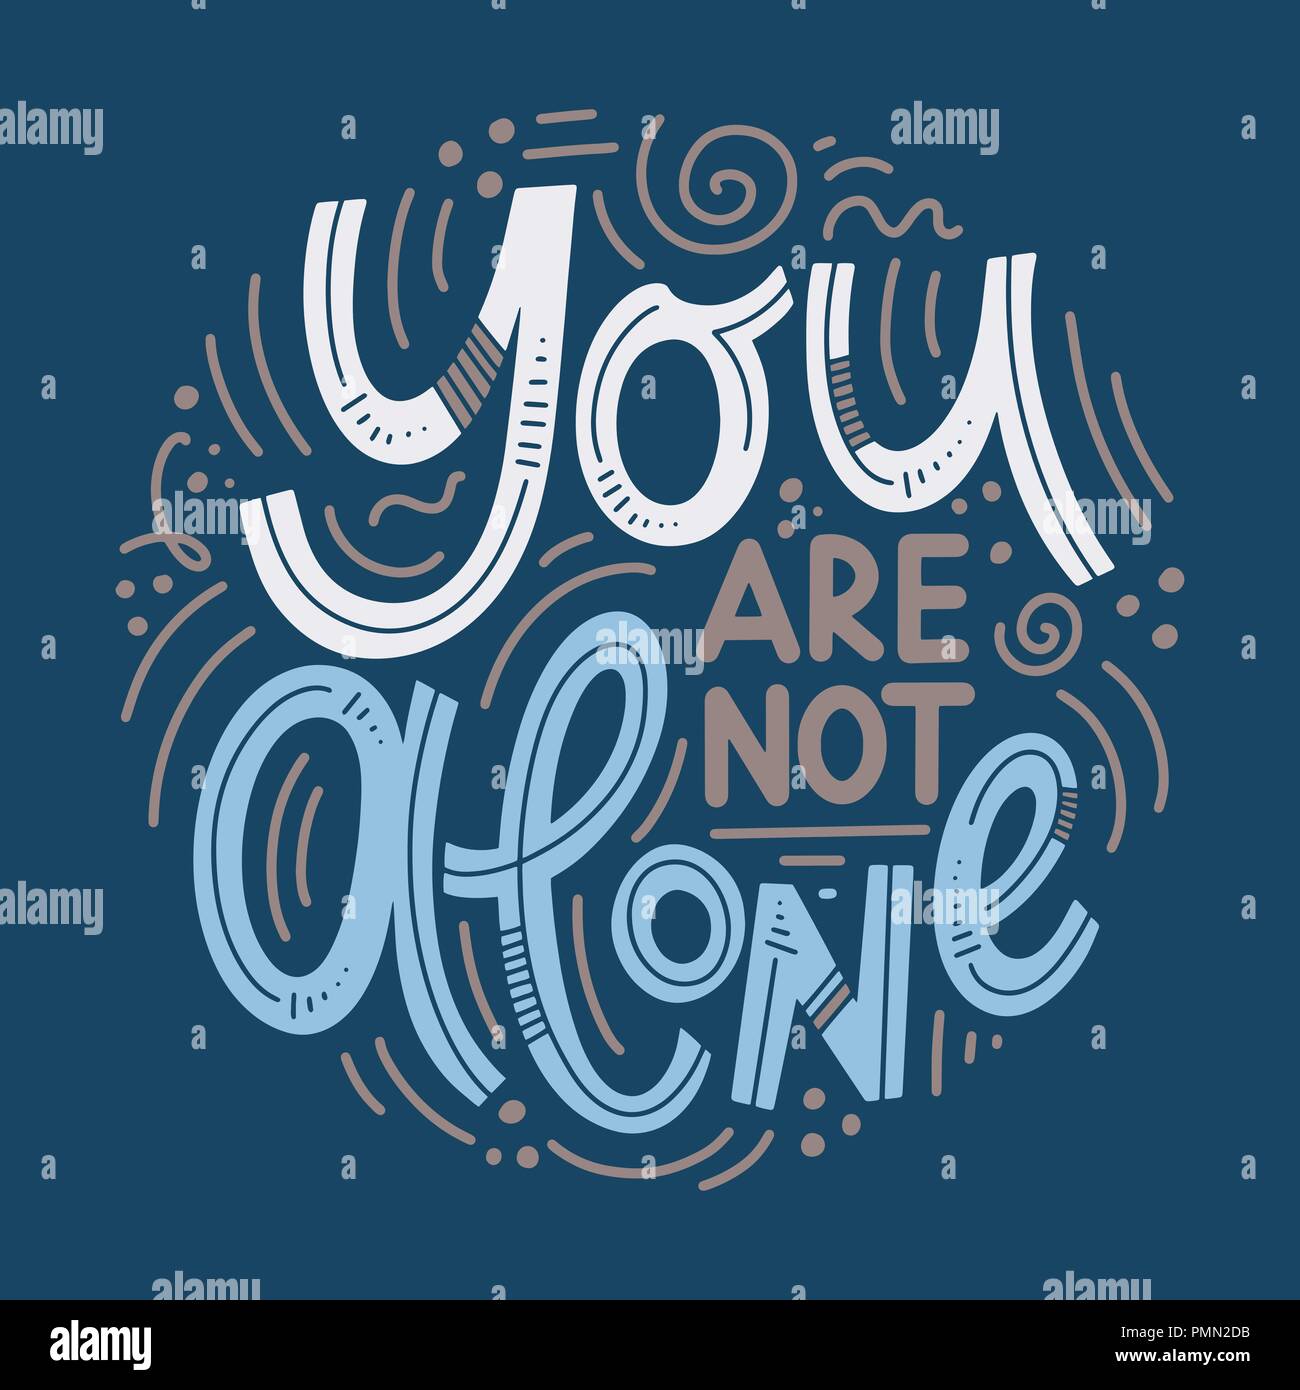 youre not alone quotes